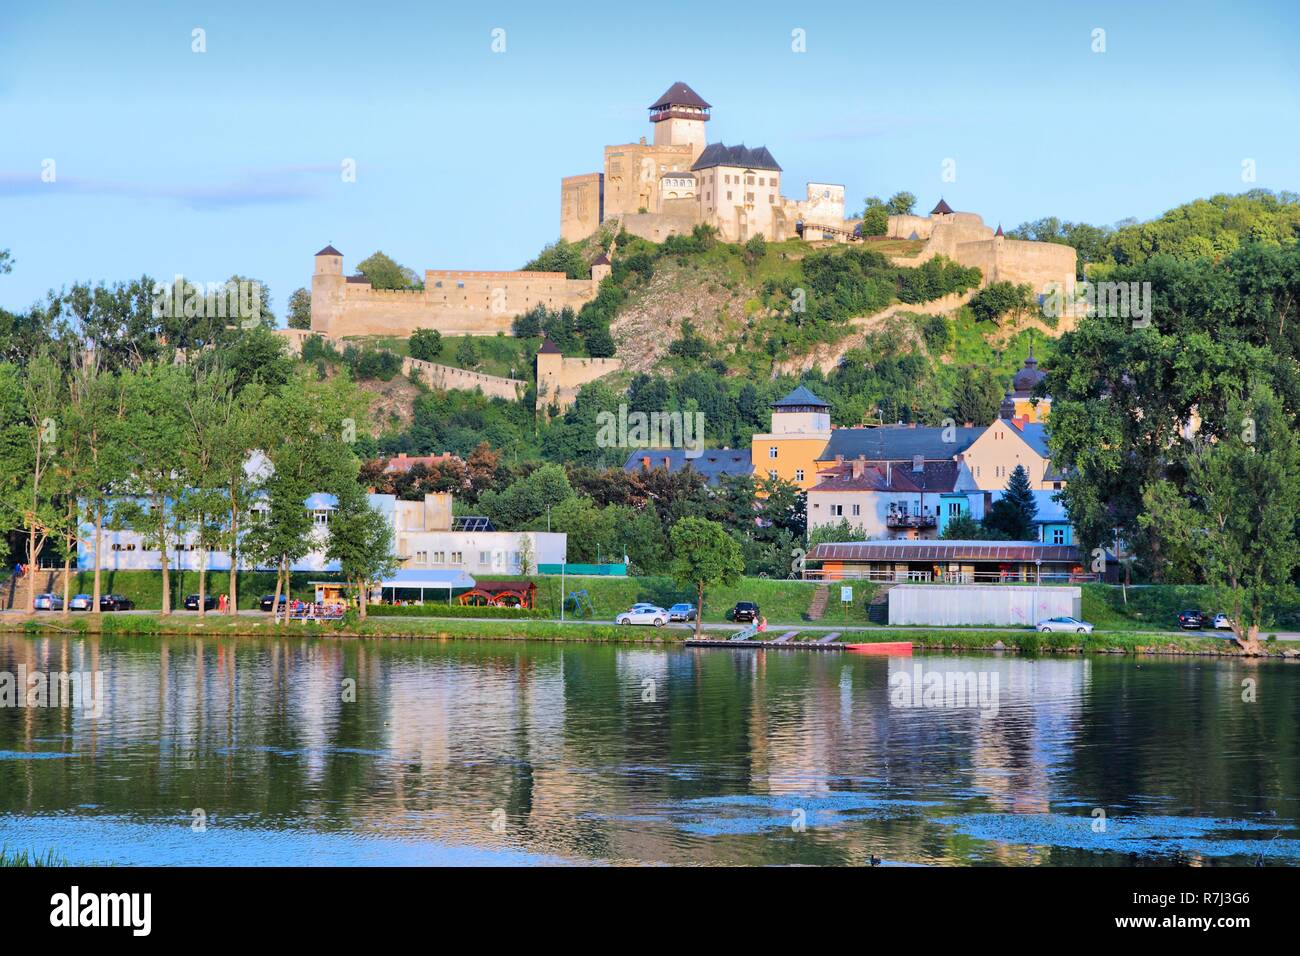 Trencin, city in Slovakia in Povazie region. Castle on a hill and Vah river. Stock Photo